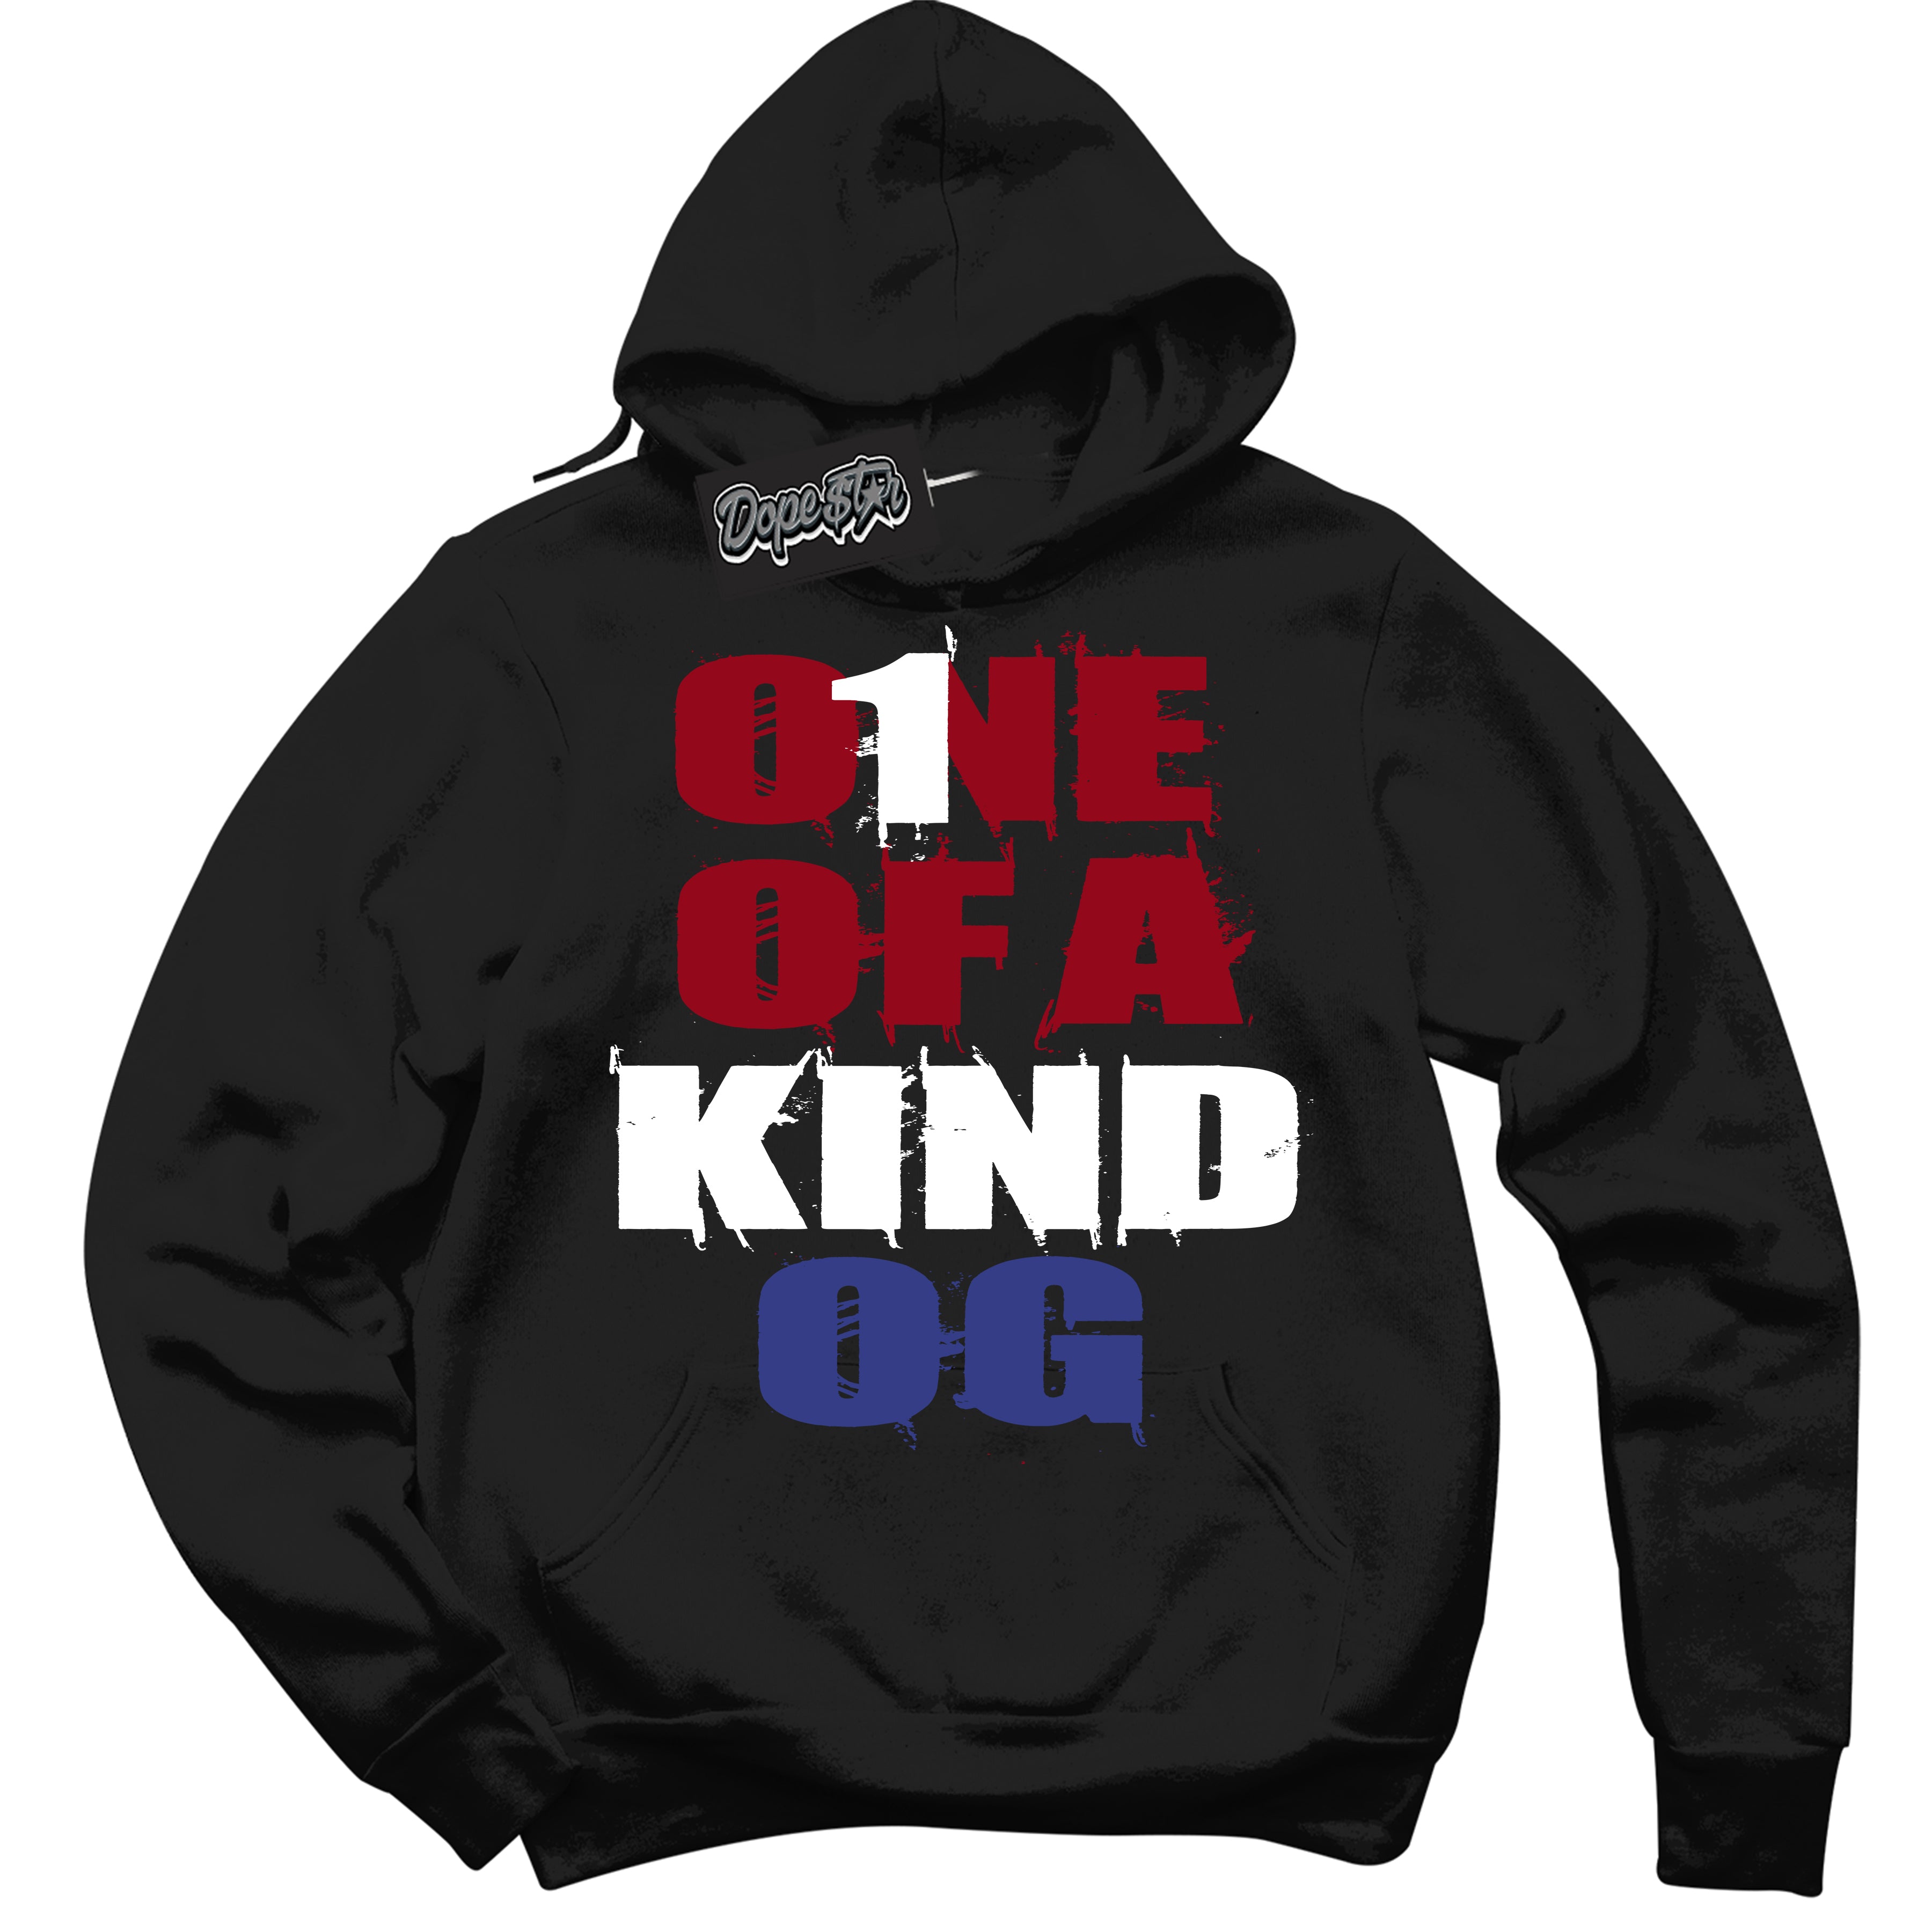 Cool Black Hoodie with “ One Of A Kind ”  design that Perfectly Matches Playoffs 8s Sneakers.